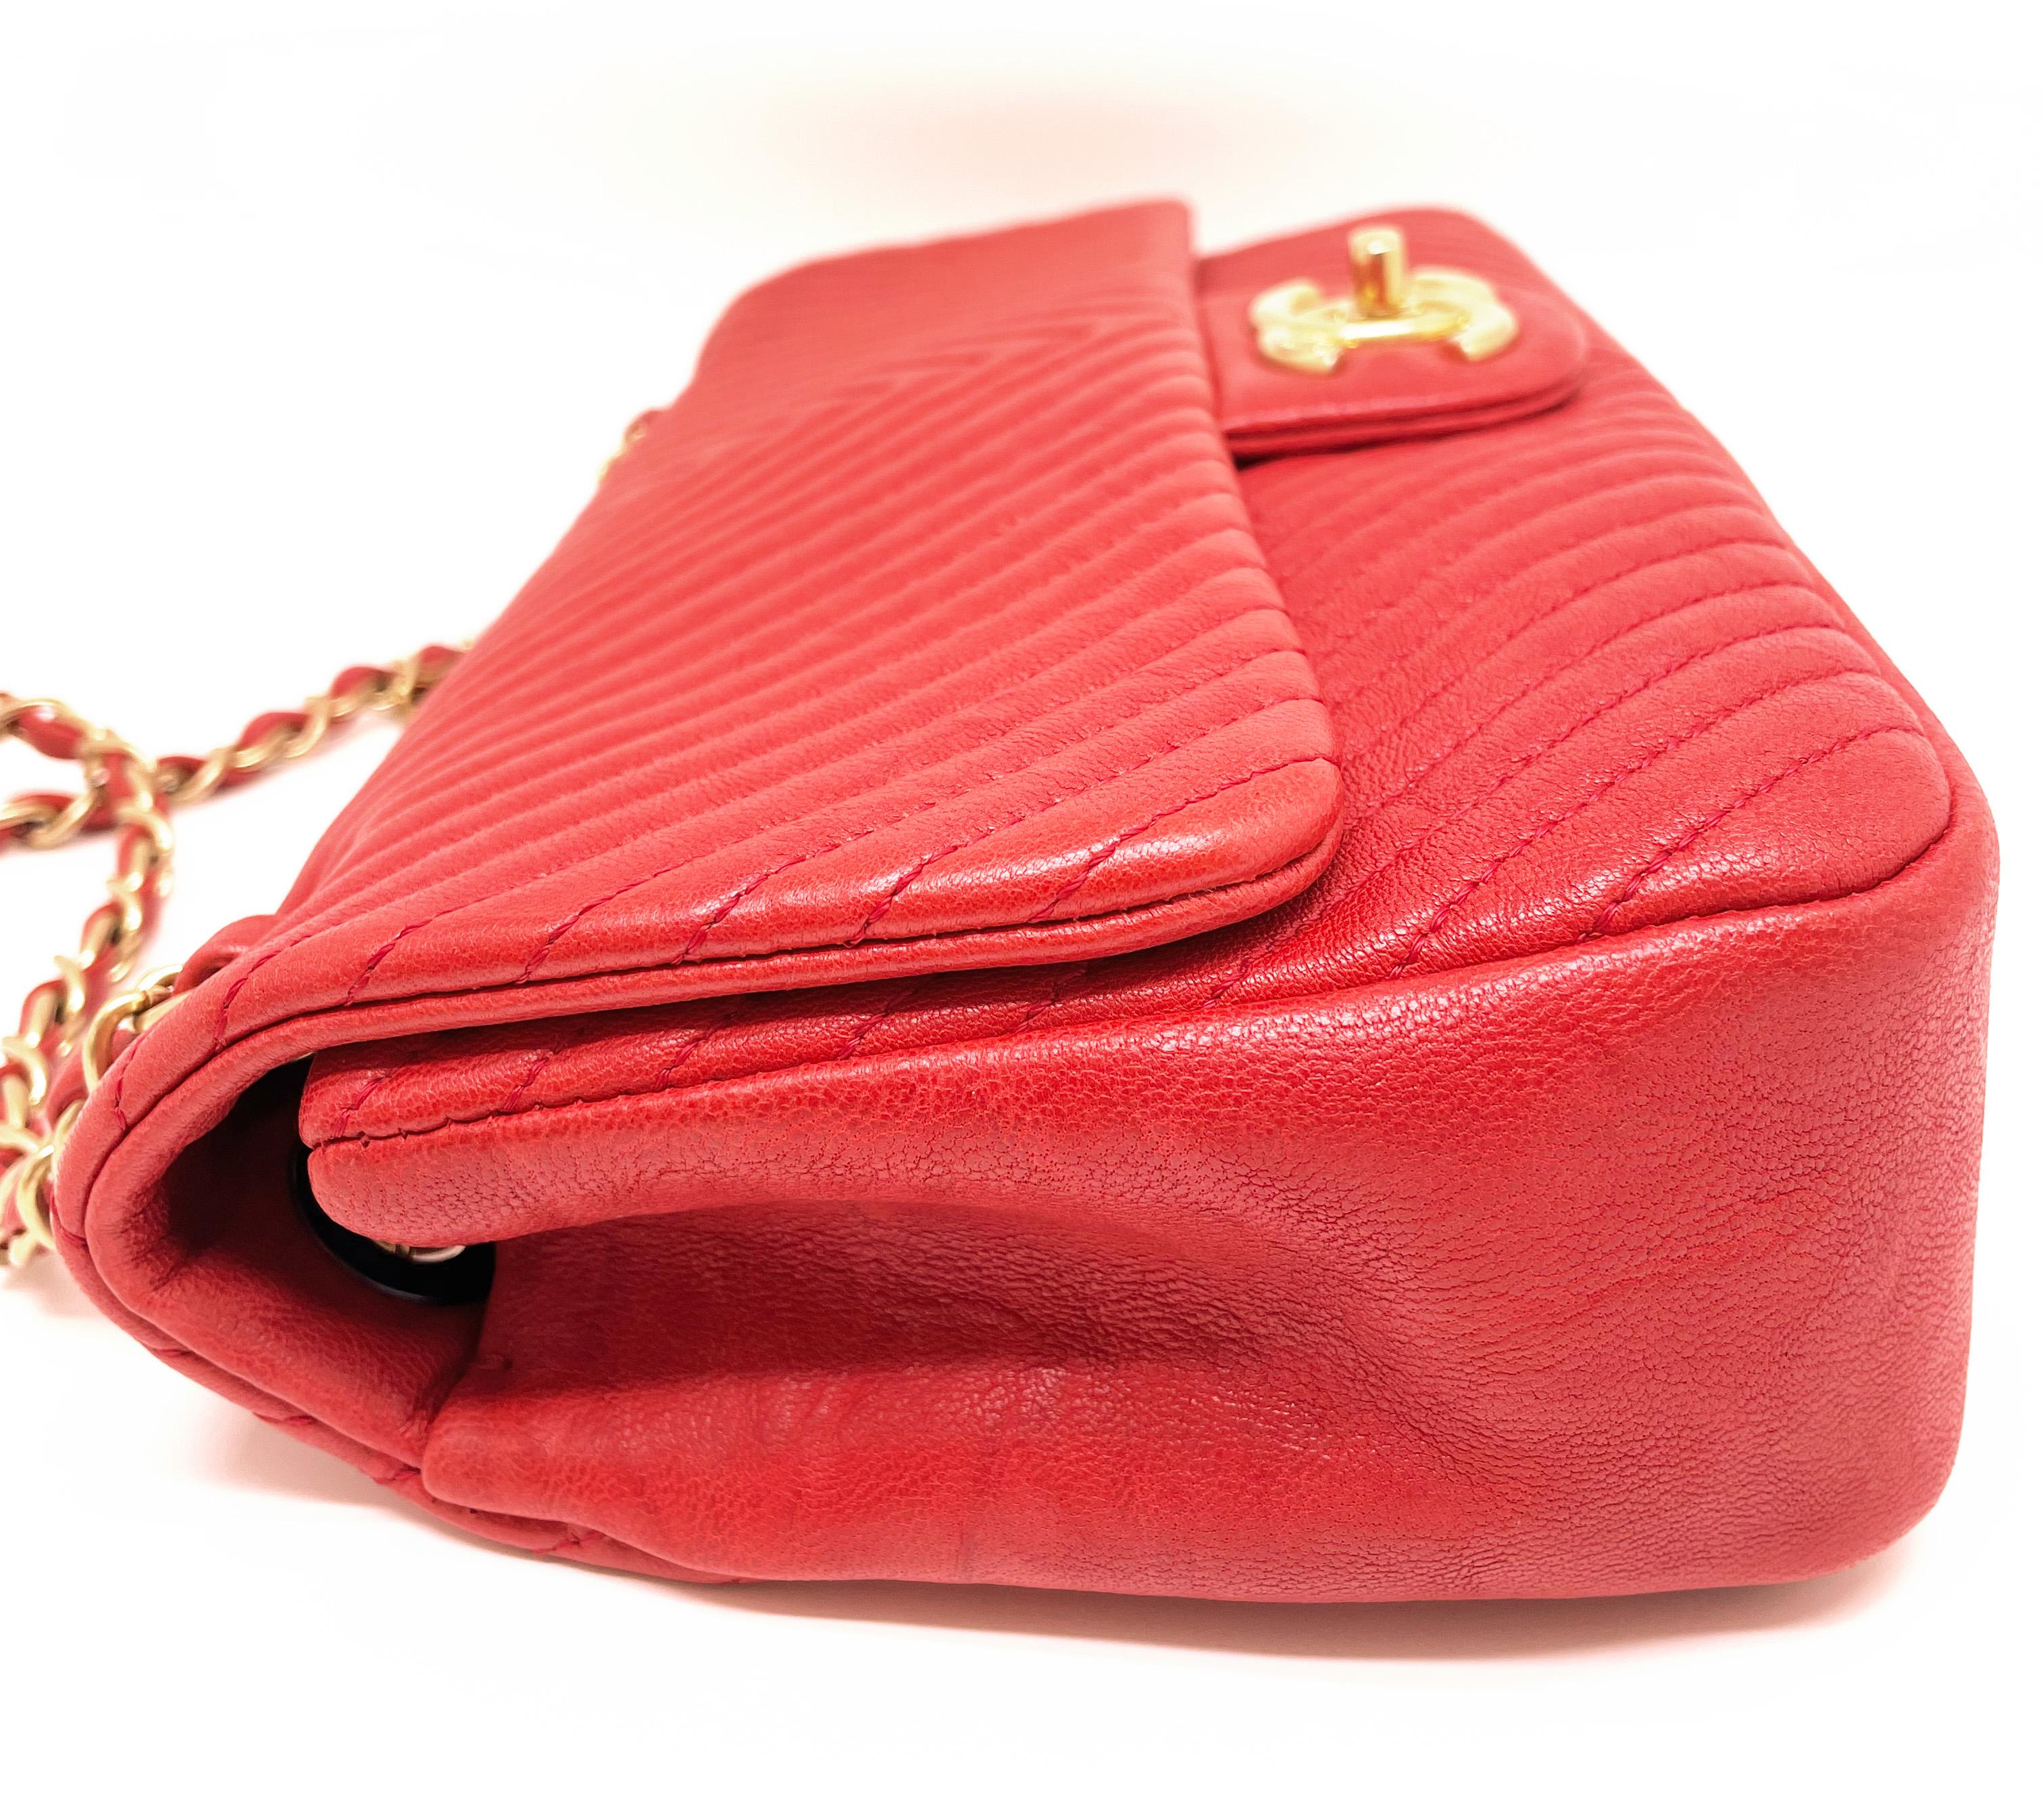 Superb Chanel 27 cm bag in leather and Valentine Red Chevron pattern For Sale 7